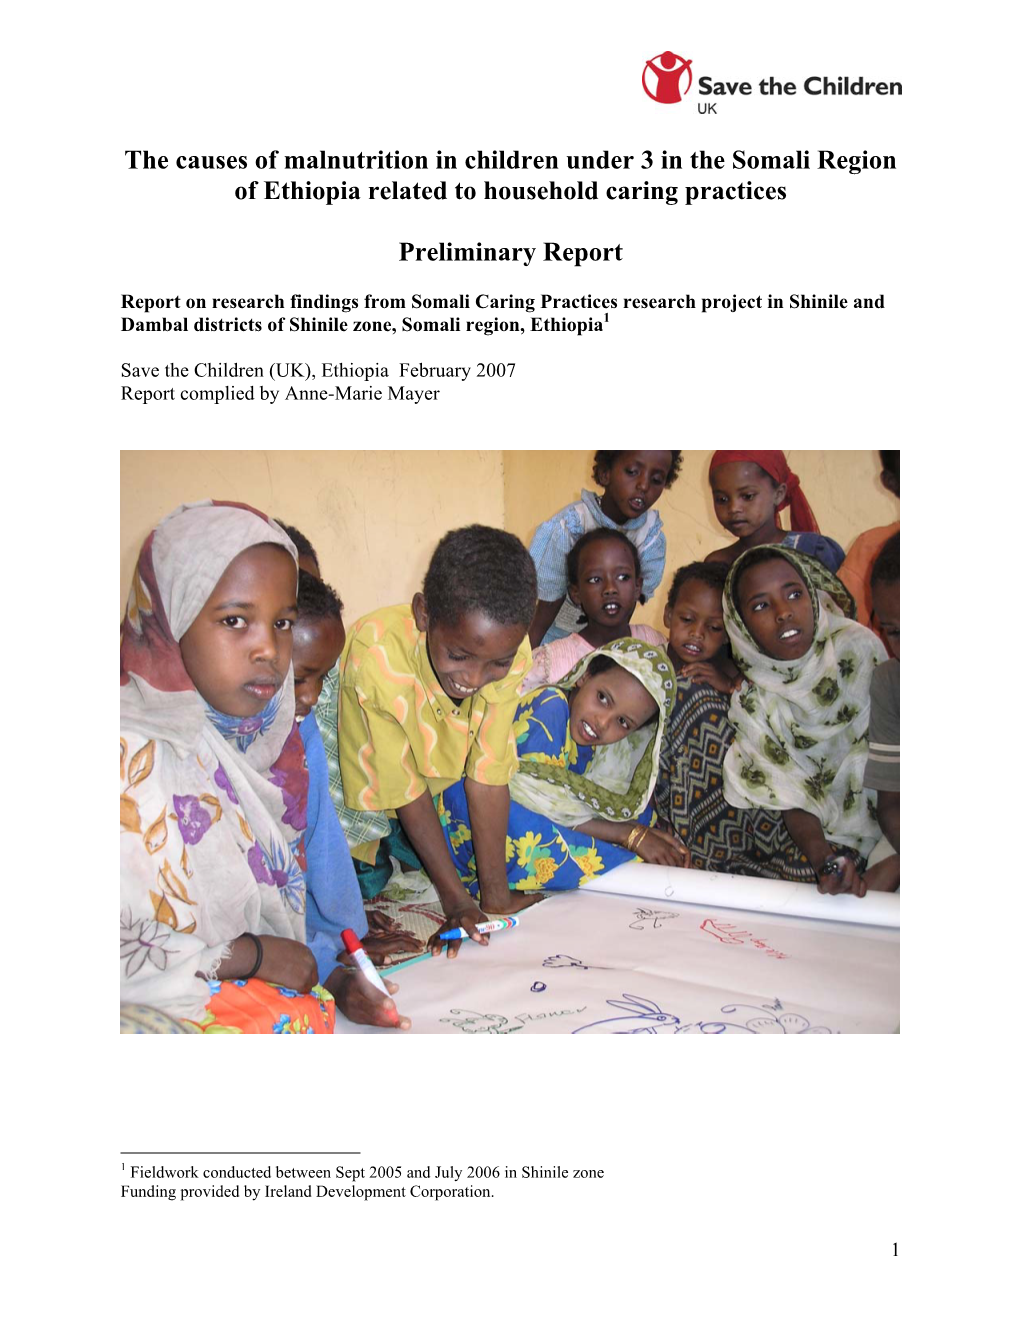 Report on Research Findings from Somali Caring Practices Research Project in Shinile and Dambal Districts of Shinile Zone, Somali Region, Ethiopia1